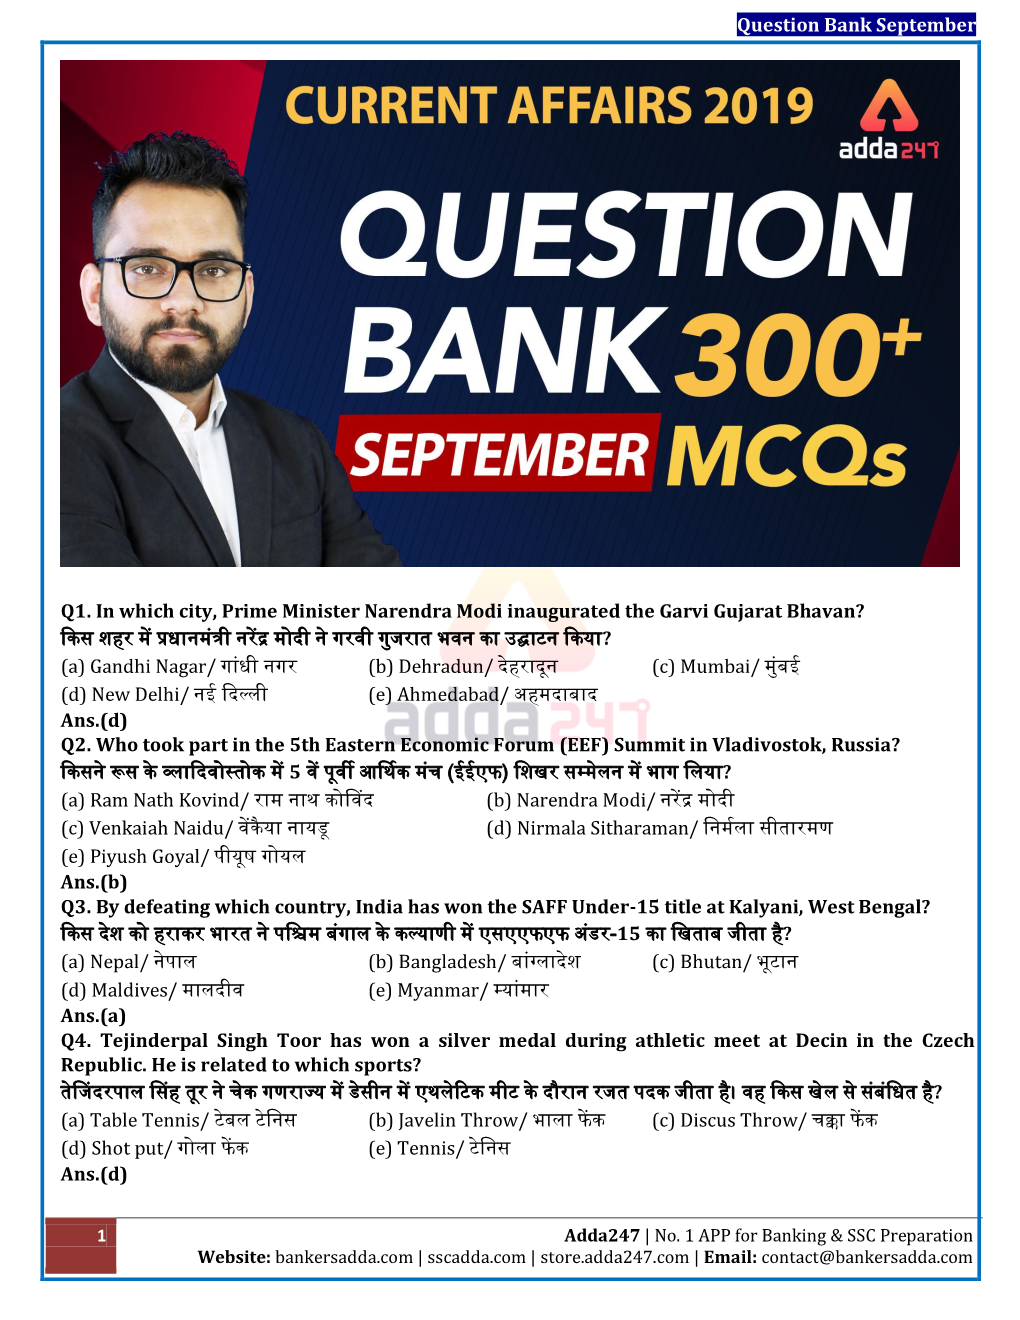 Question Bank September Q1. in Which City, Prime Minister Narendra Modi Inaugurated the Garvi Gujarat Bhavan? ककस शह (